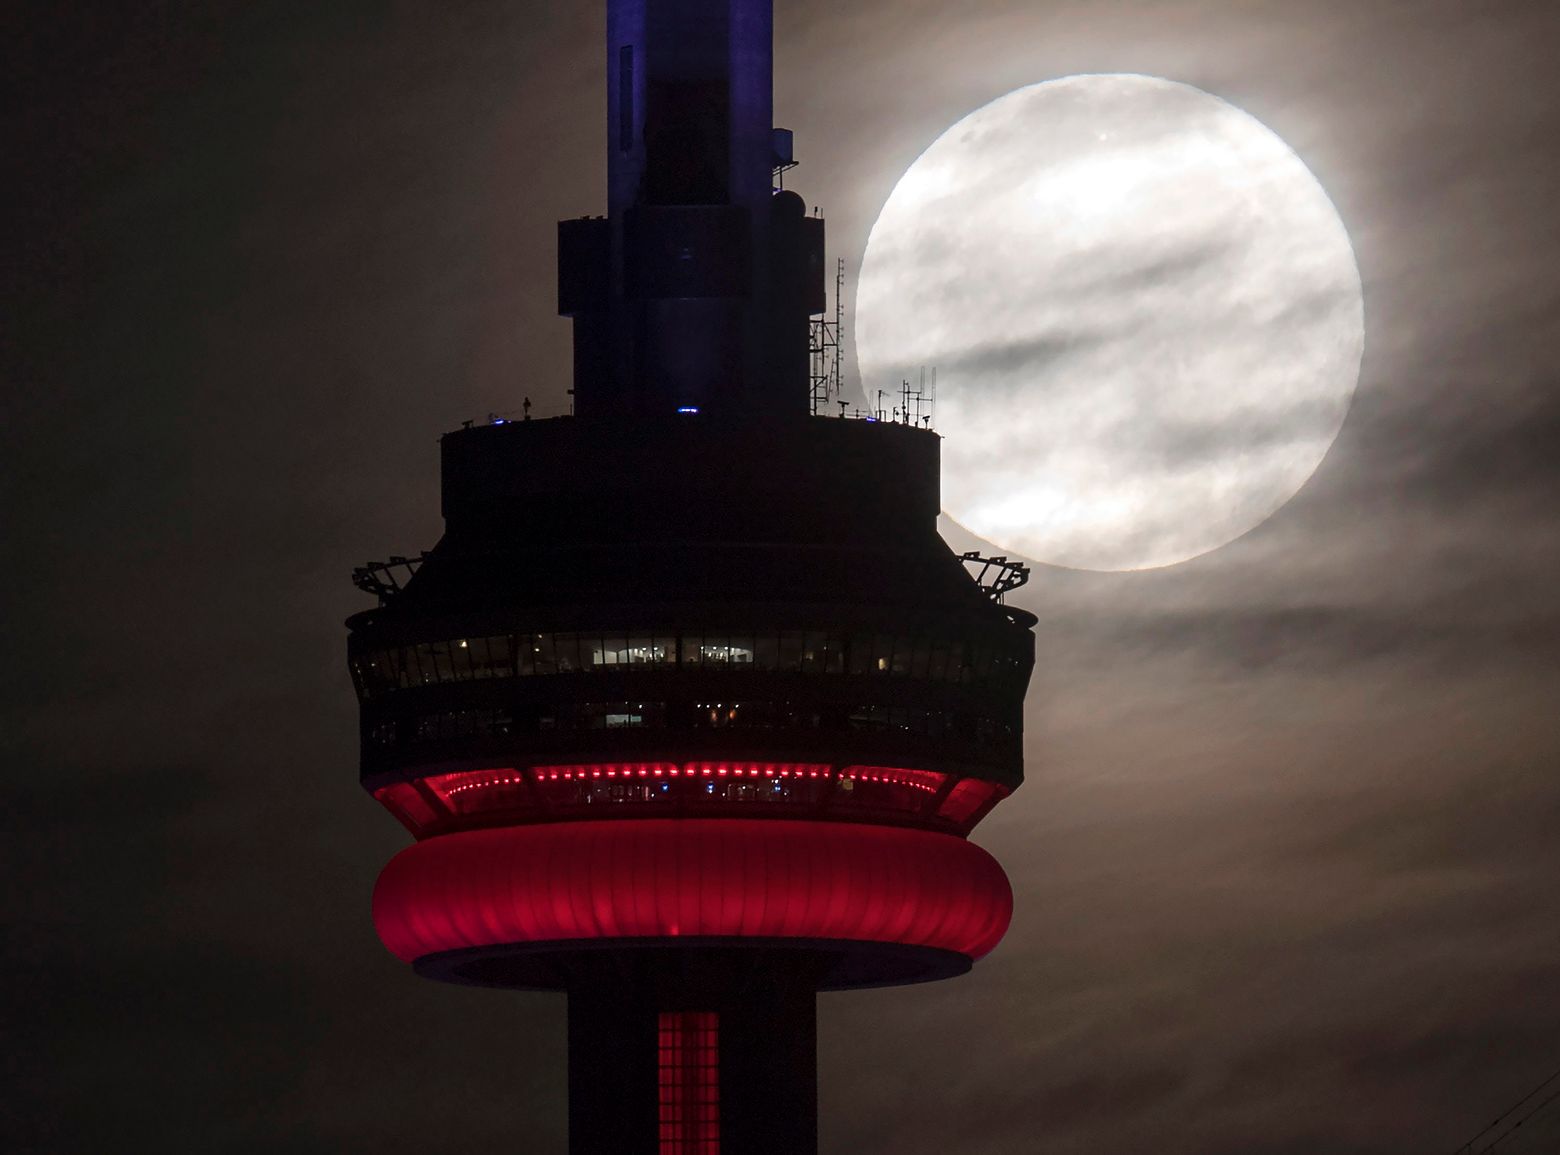 The supermoon sets behind the CN tower in Toronto on Monday, Nov. 14, 2016. The brightest moon in almost 69 years lights up the sky this week in a treat for star watchers around the globe. (Frank Gunn/The Canadian Press via AP)